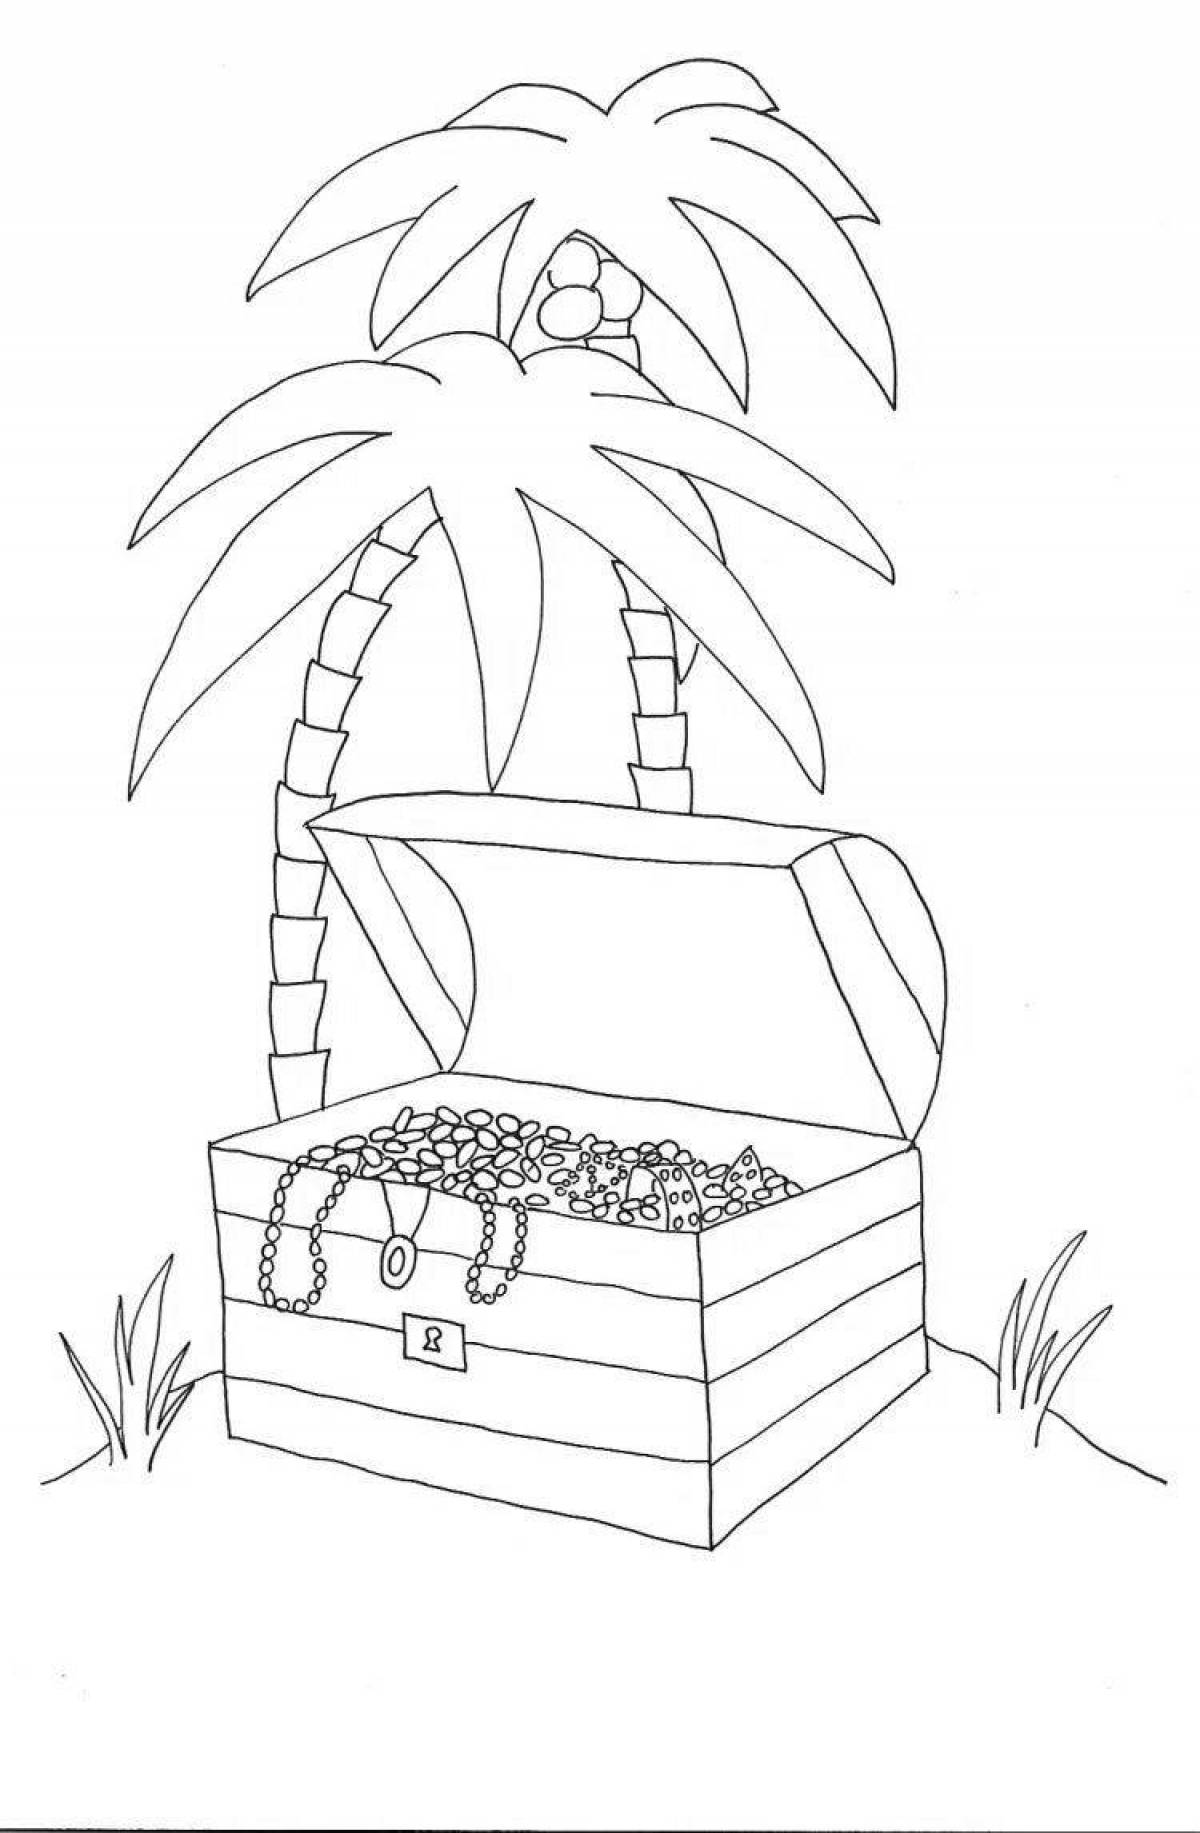 Wonderful island coloring pages for kids